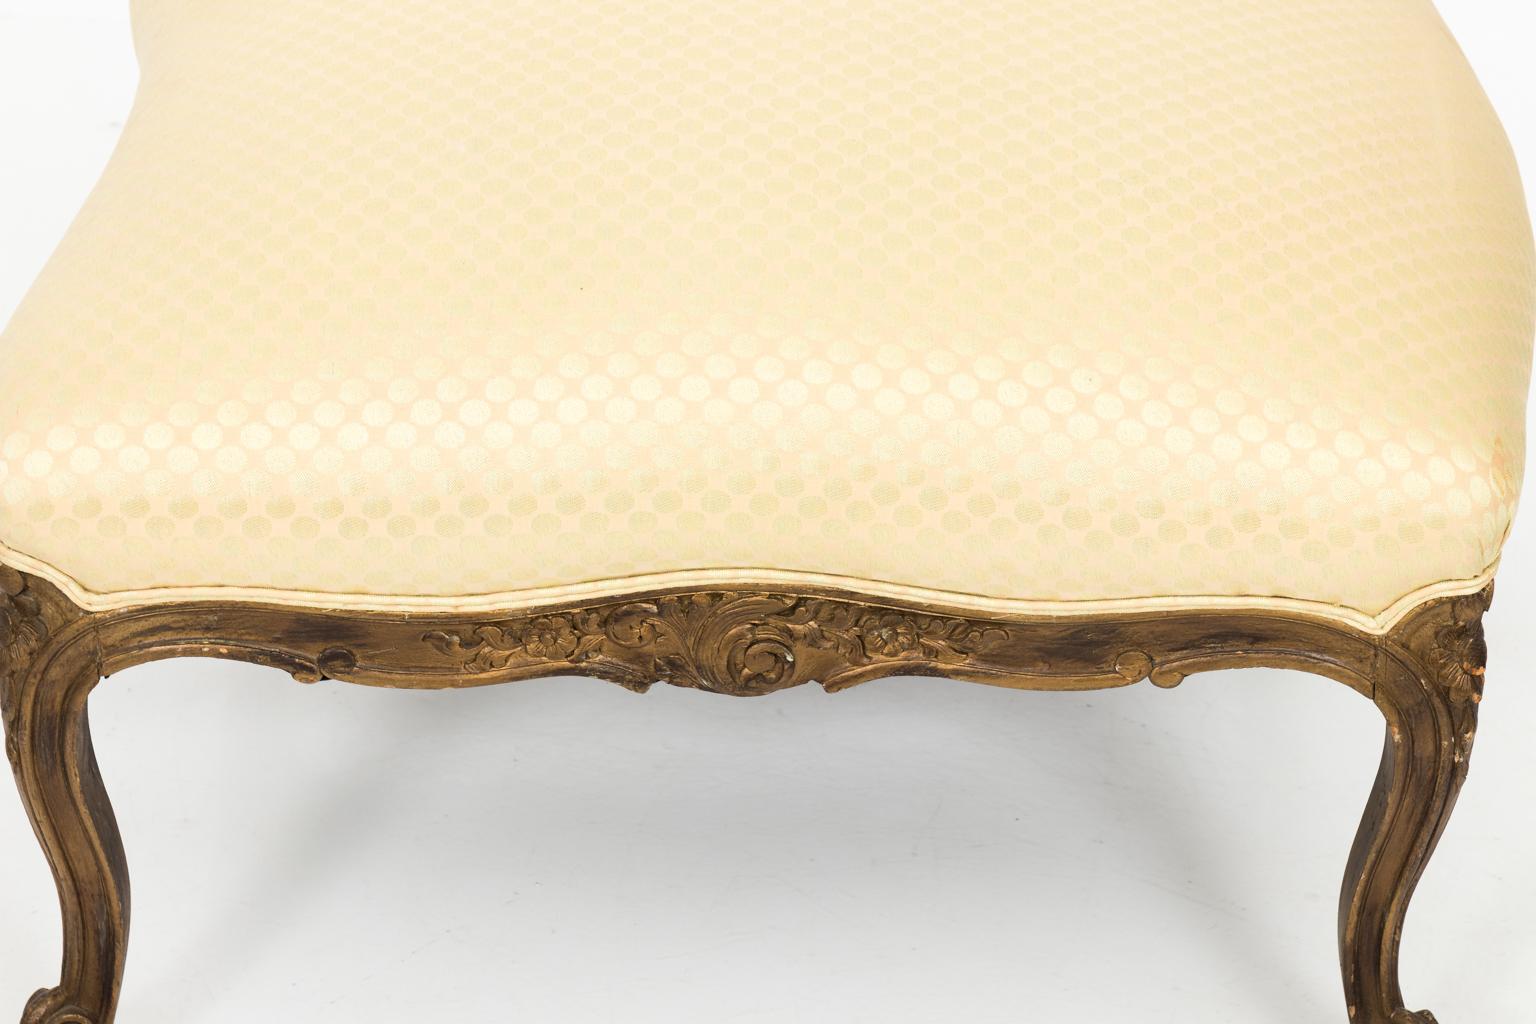 19th Century Giltwood Chaise Lounge Chair For Sale 3